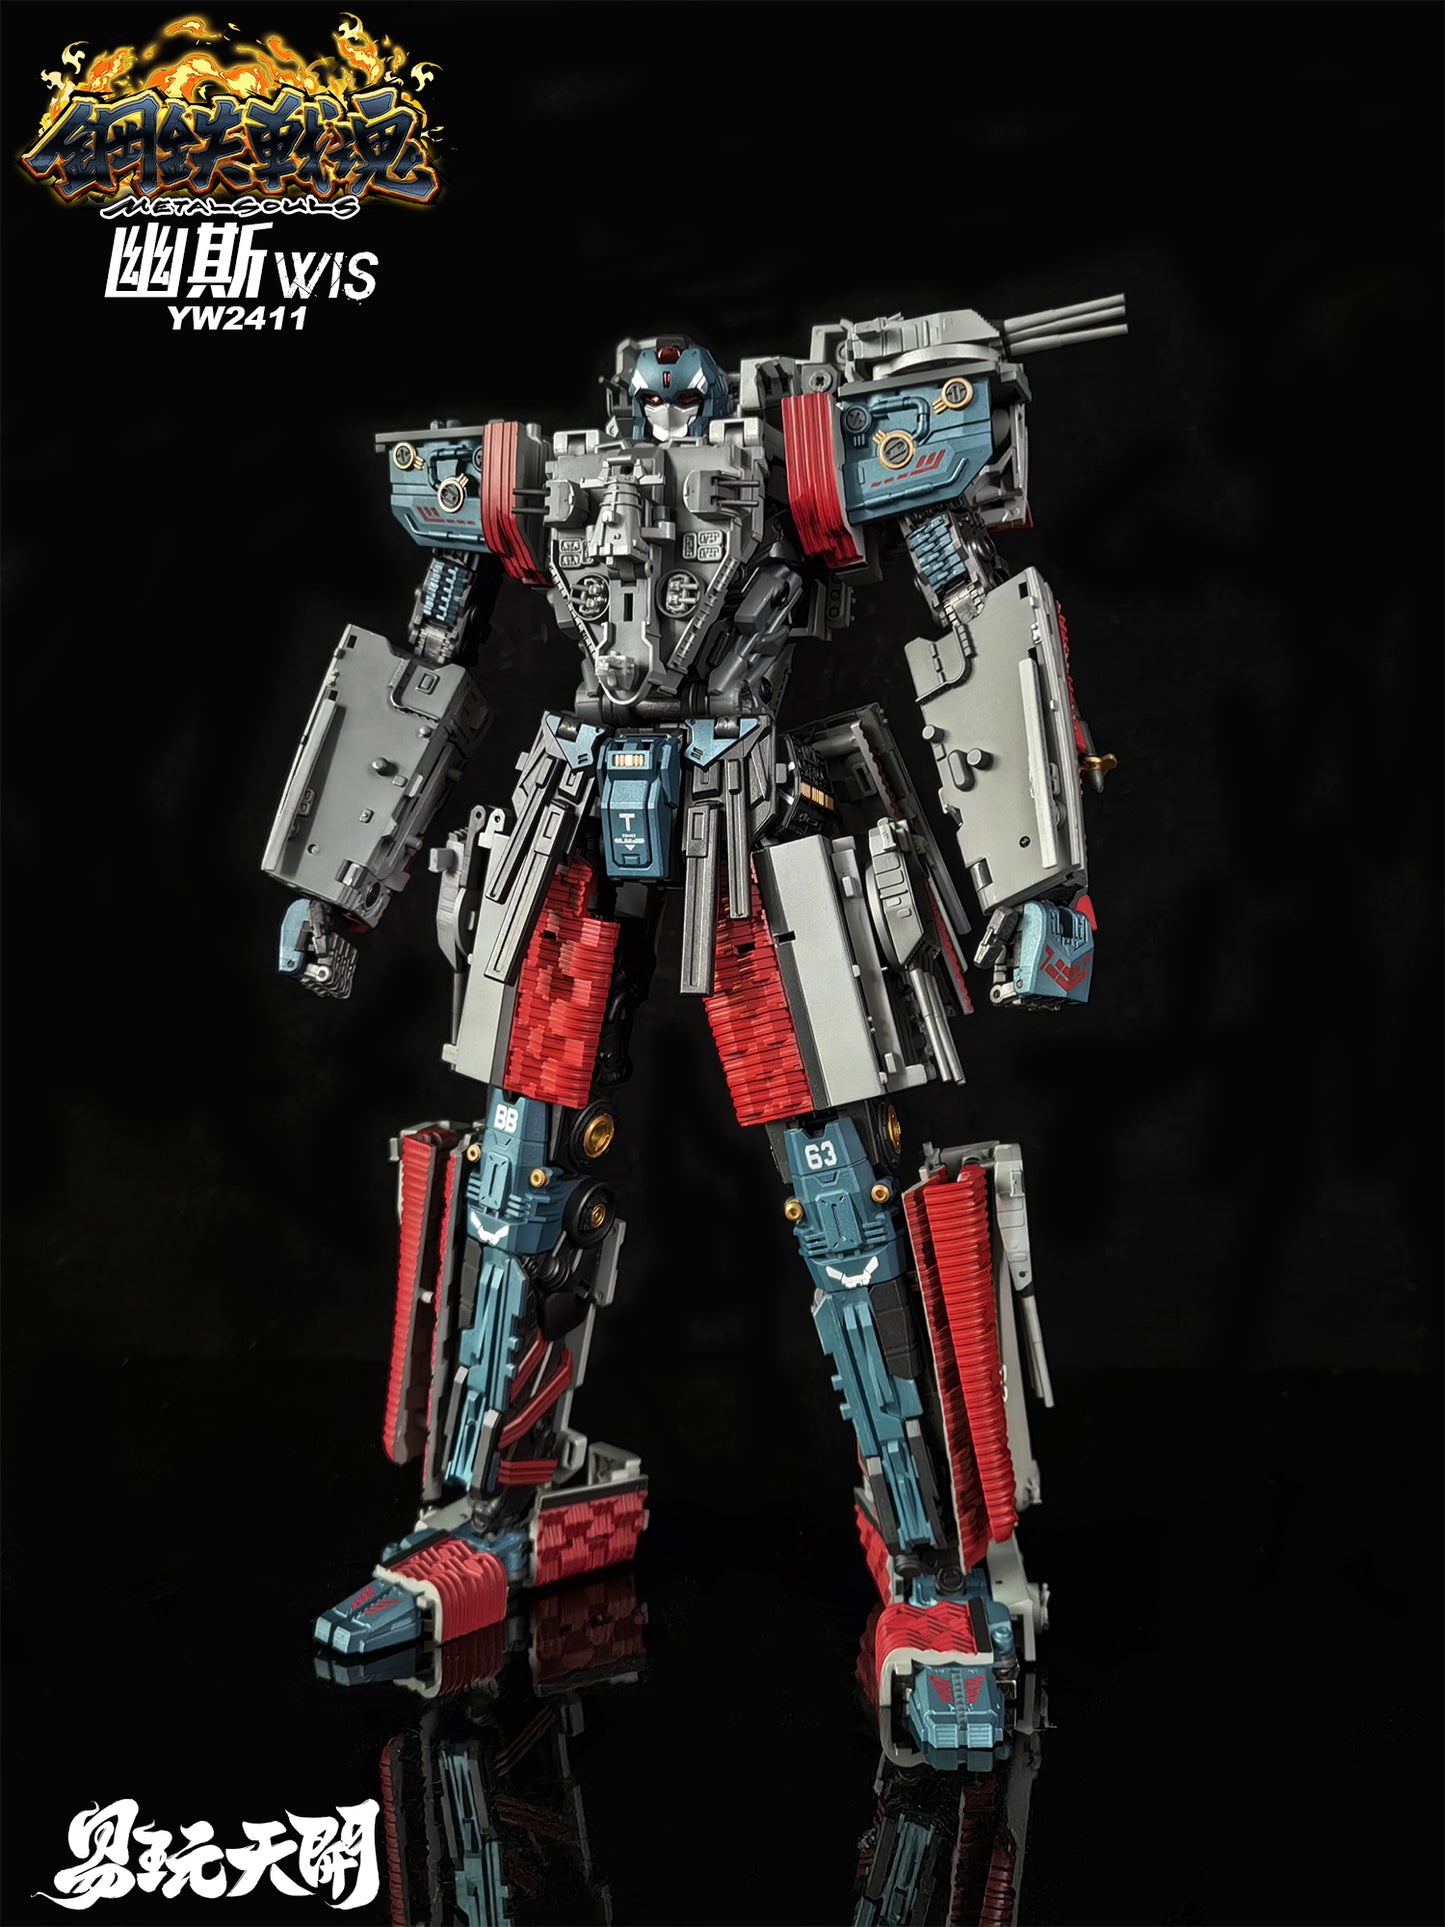 TOYSEASY METAL SOULS SERIES YW2411 "WIS" TRANSFORMABLE ACTION FIGURE